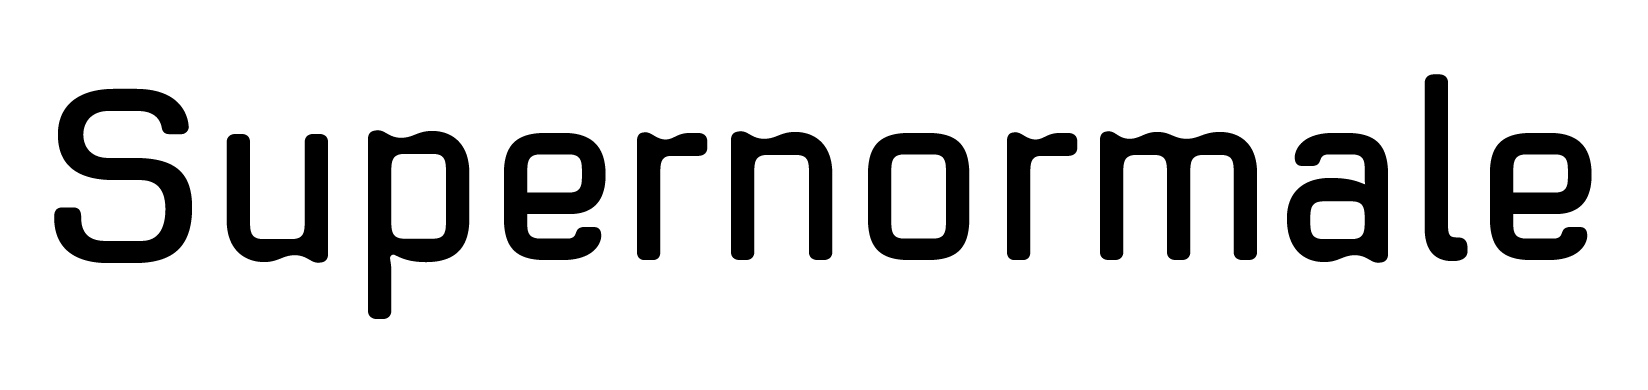 Supernormale Typeface